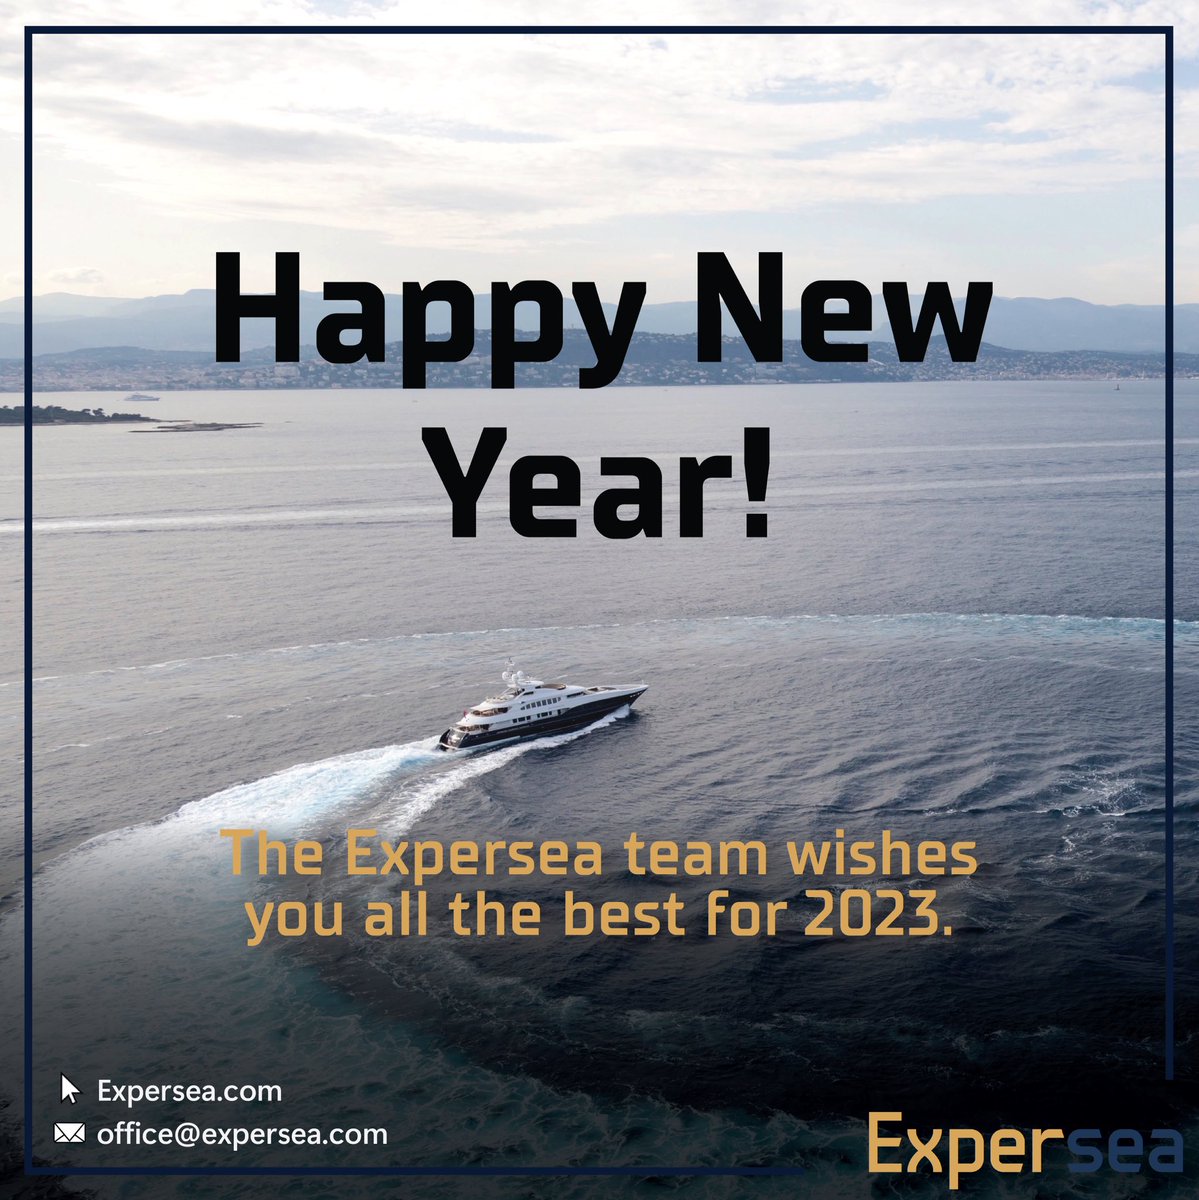 Happy New Year to all of our clients and partners!

Expersea wishes you all the best for 2023 🎊

💻 expersea.com
✉️ office@expersea.com
.
.
.
#superyacht #yachting #yachtindustry #superyachtindustry #yachtlife #yachtie #yachtielifestyle #yachtingcareer